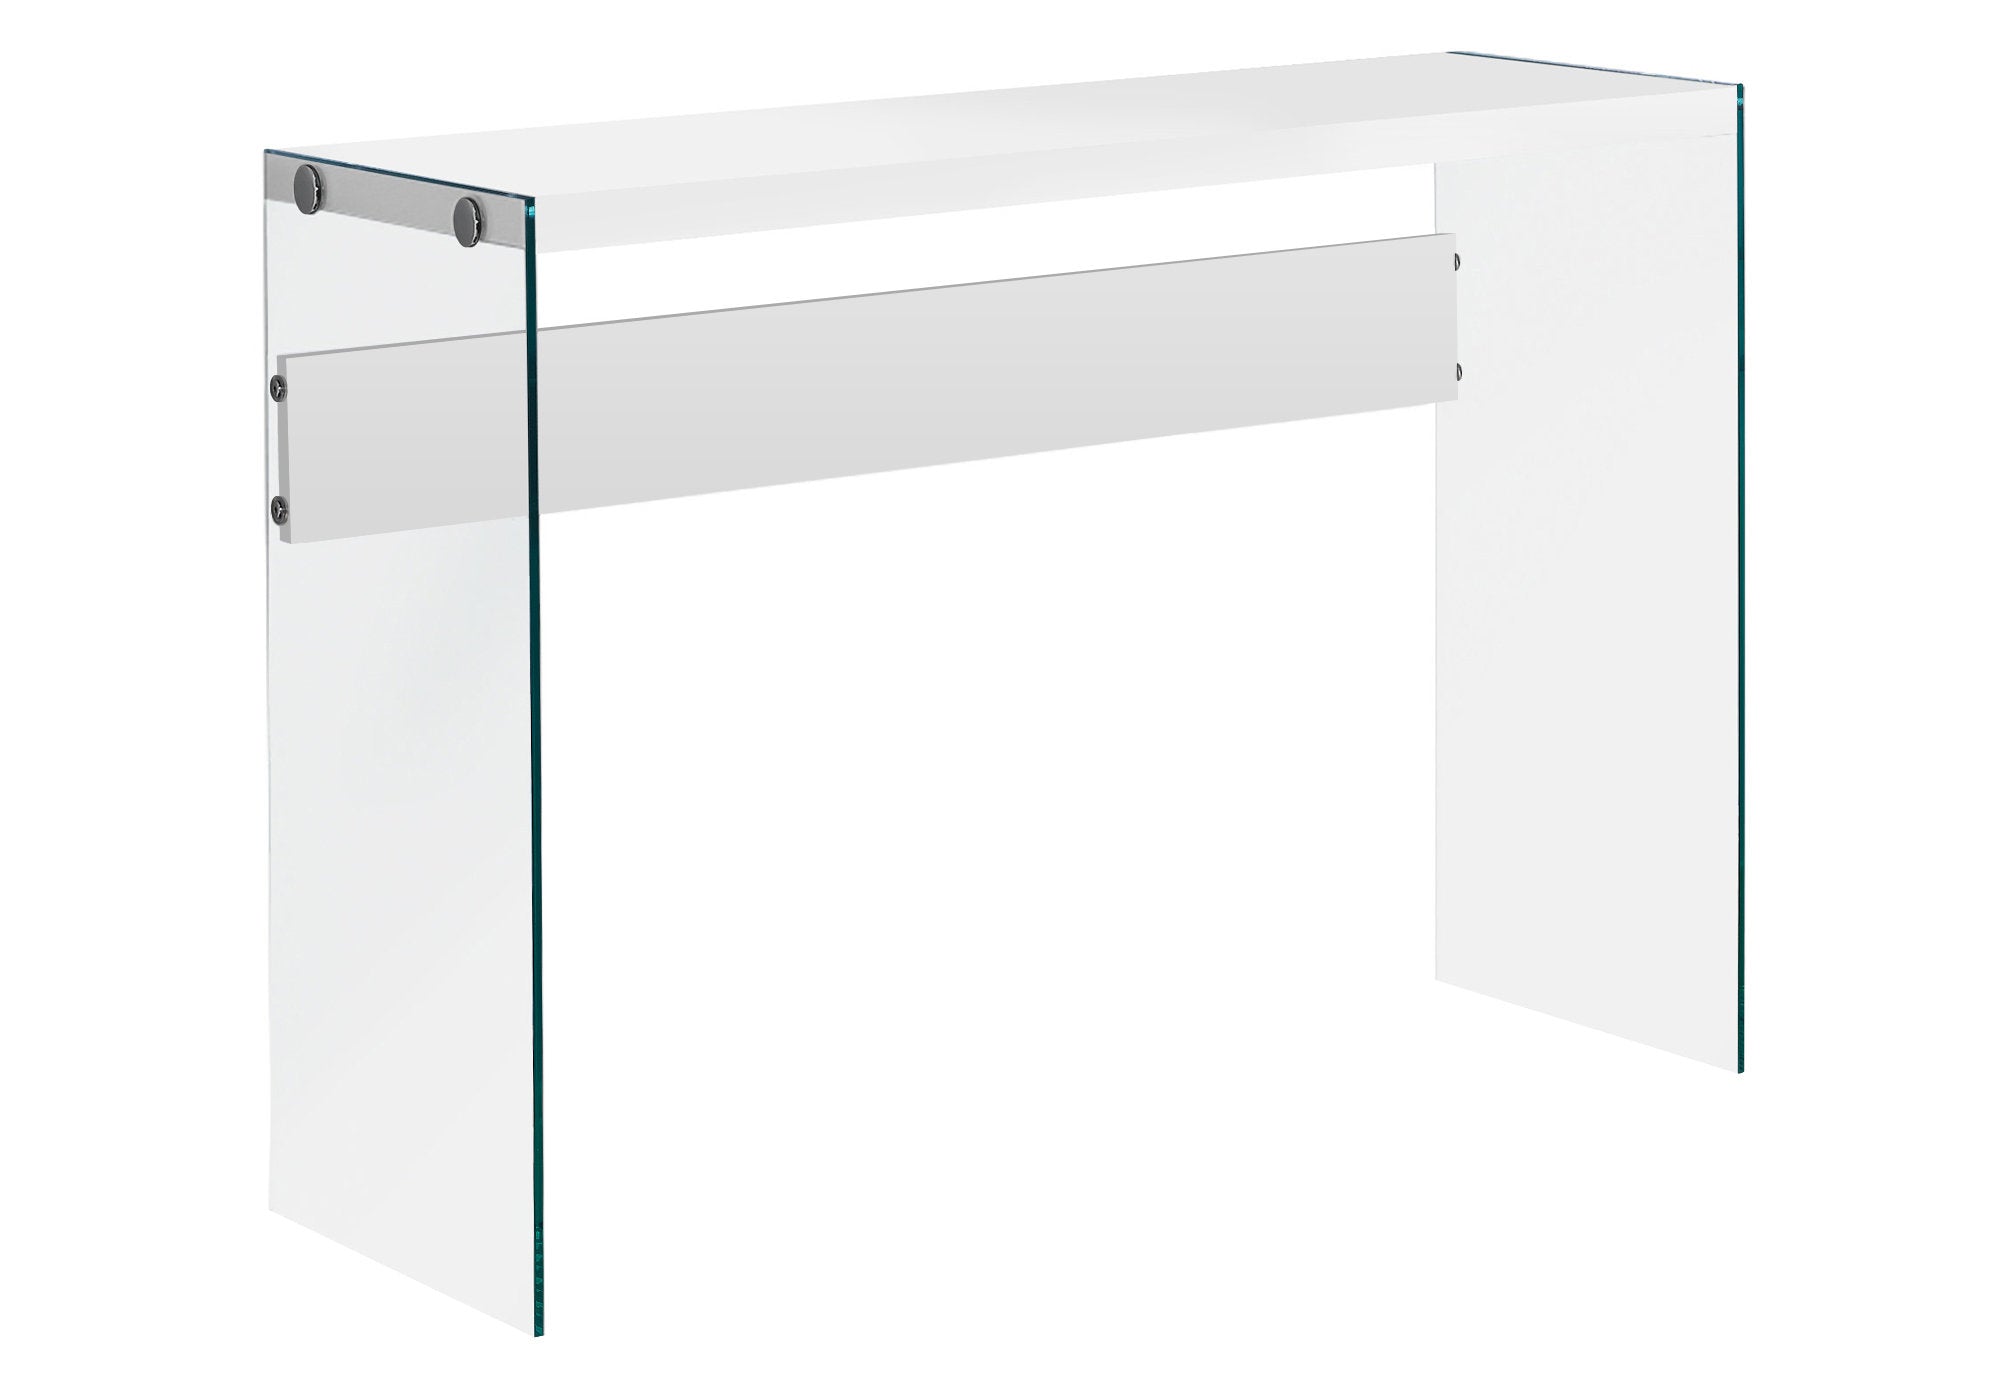 MN-153288    Accent Table, Console, Entryway, Narrow, Sofa, Living Room, Bedroom, Tempered Glass, Laminate, Glossy White, Clear, Contemporary, Modern